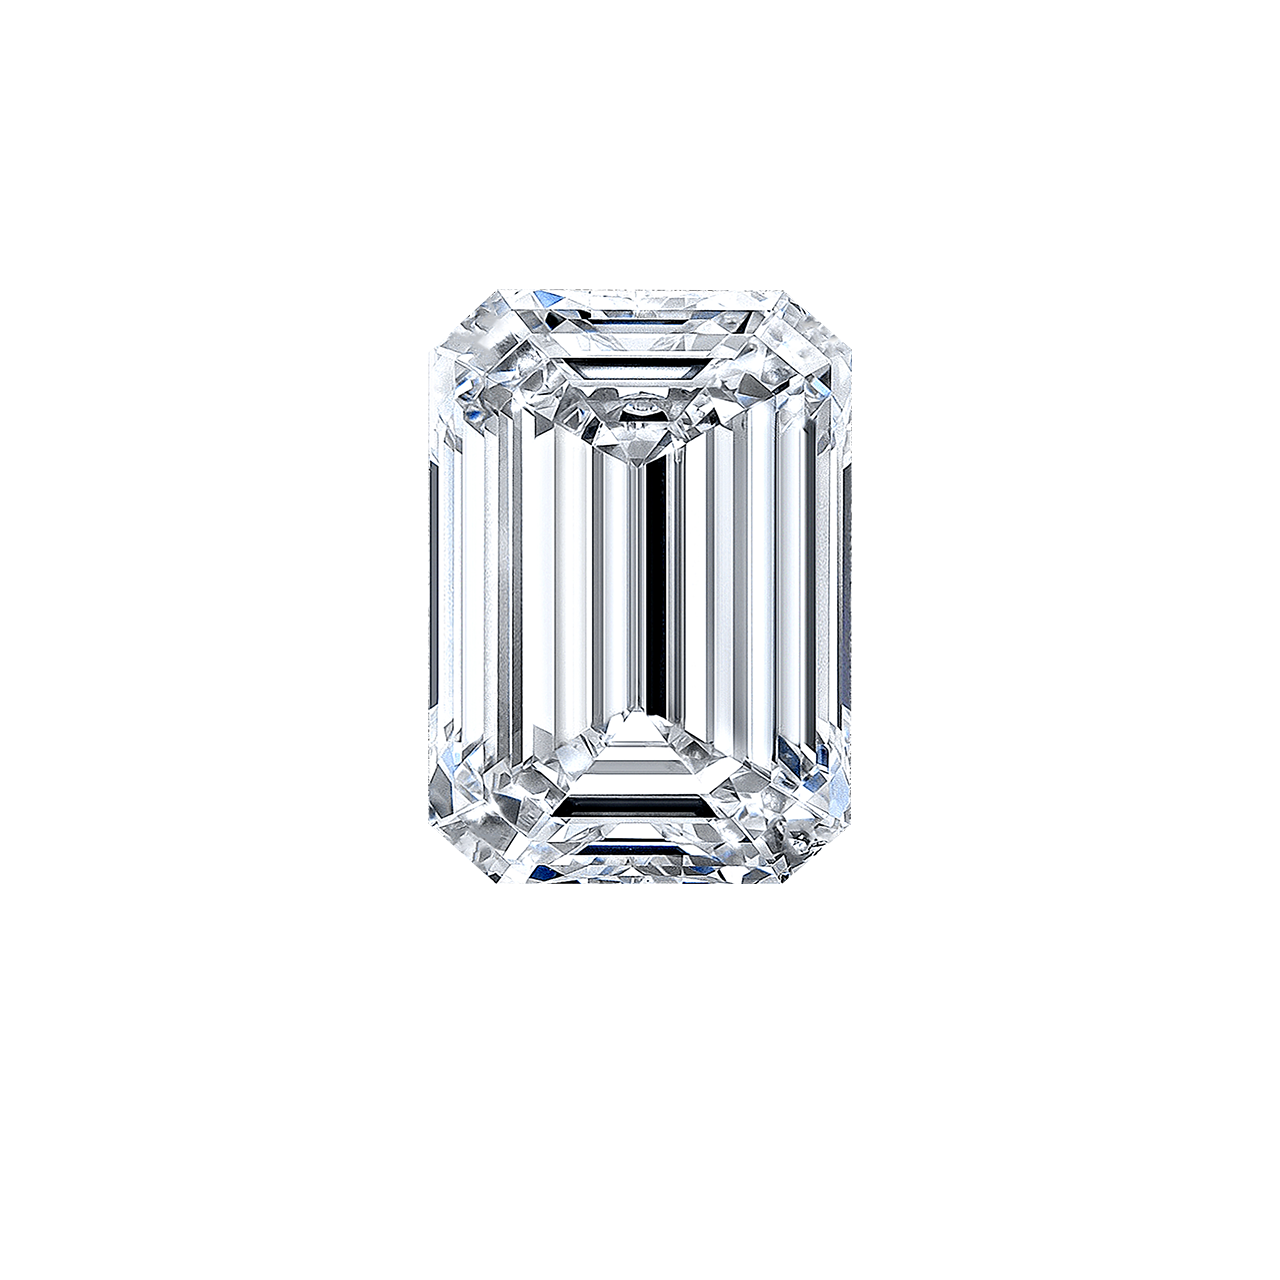 GIA 10.83 克拉 全美無瑕白鑽裸石
HIGHLY IMPORTANT UNMOUNTED FLAWLESS DIAMOND